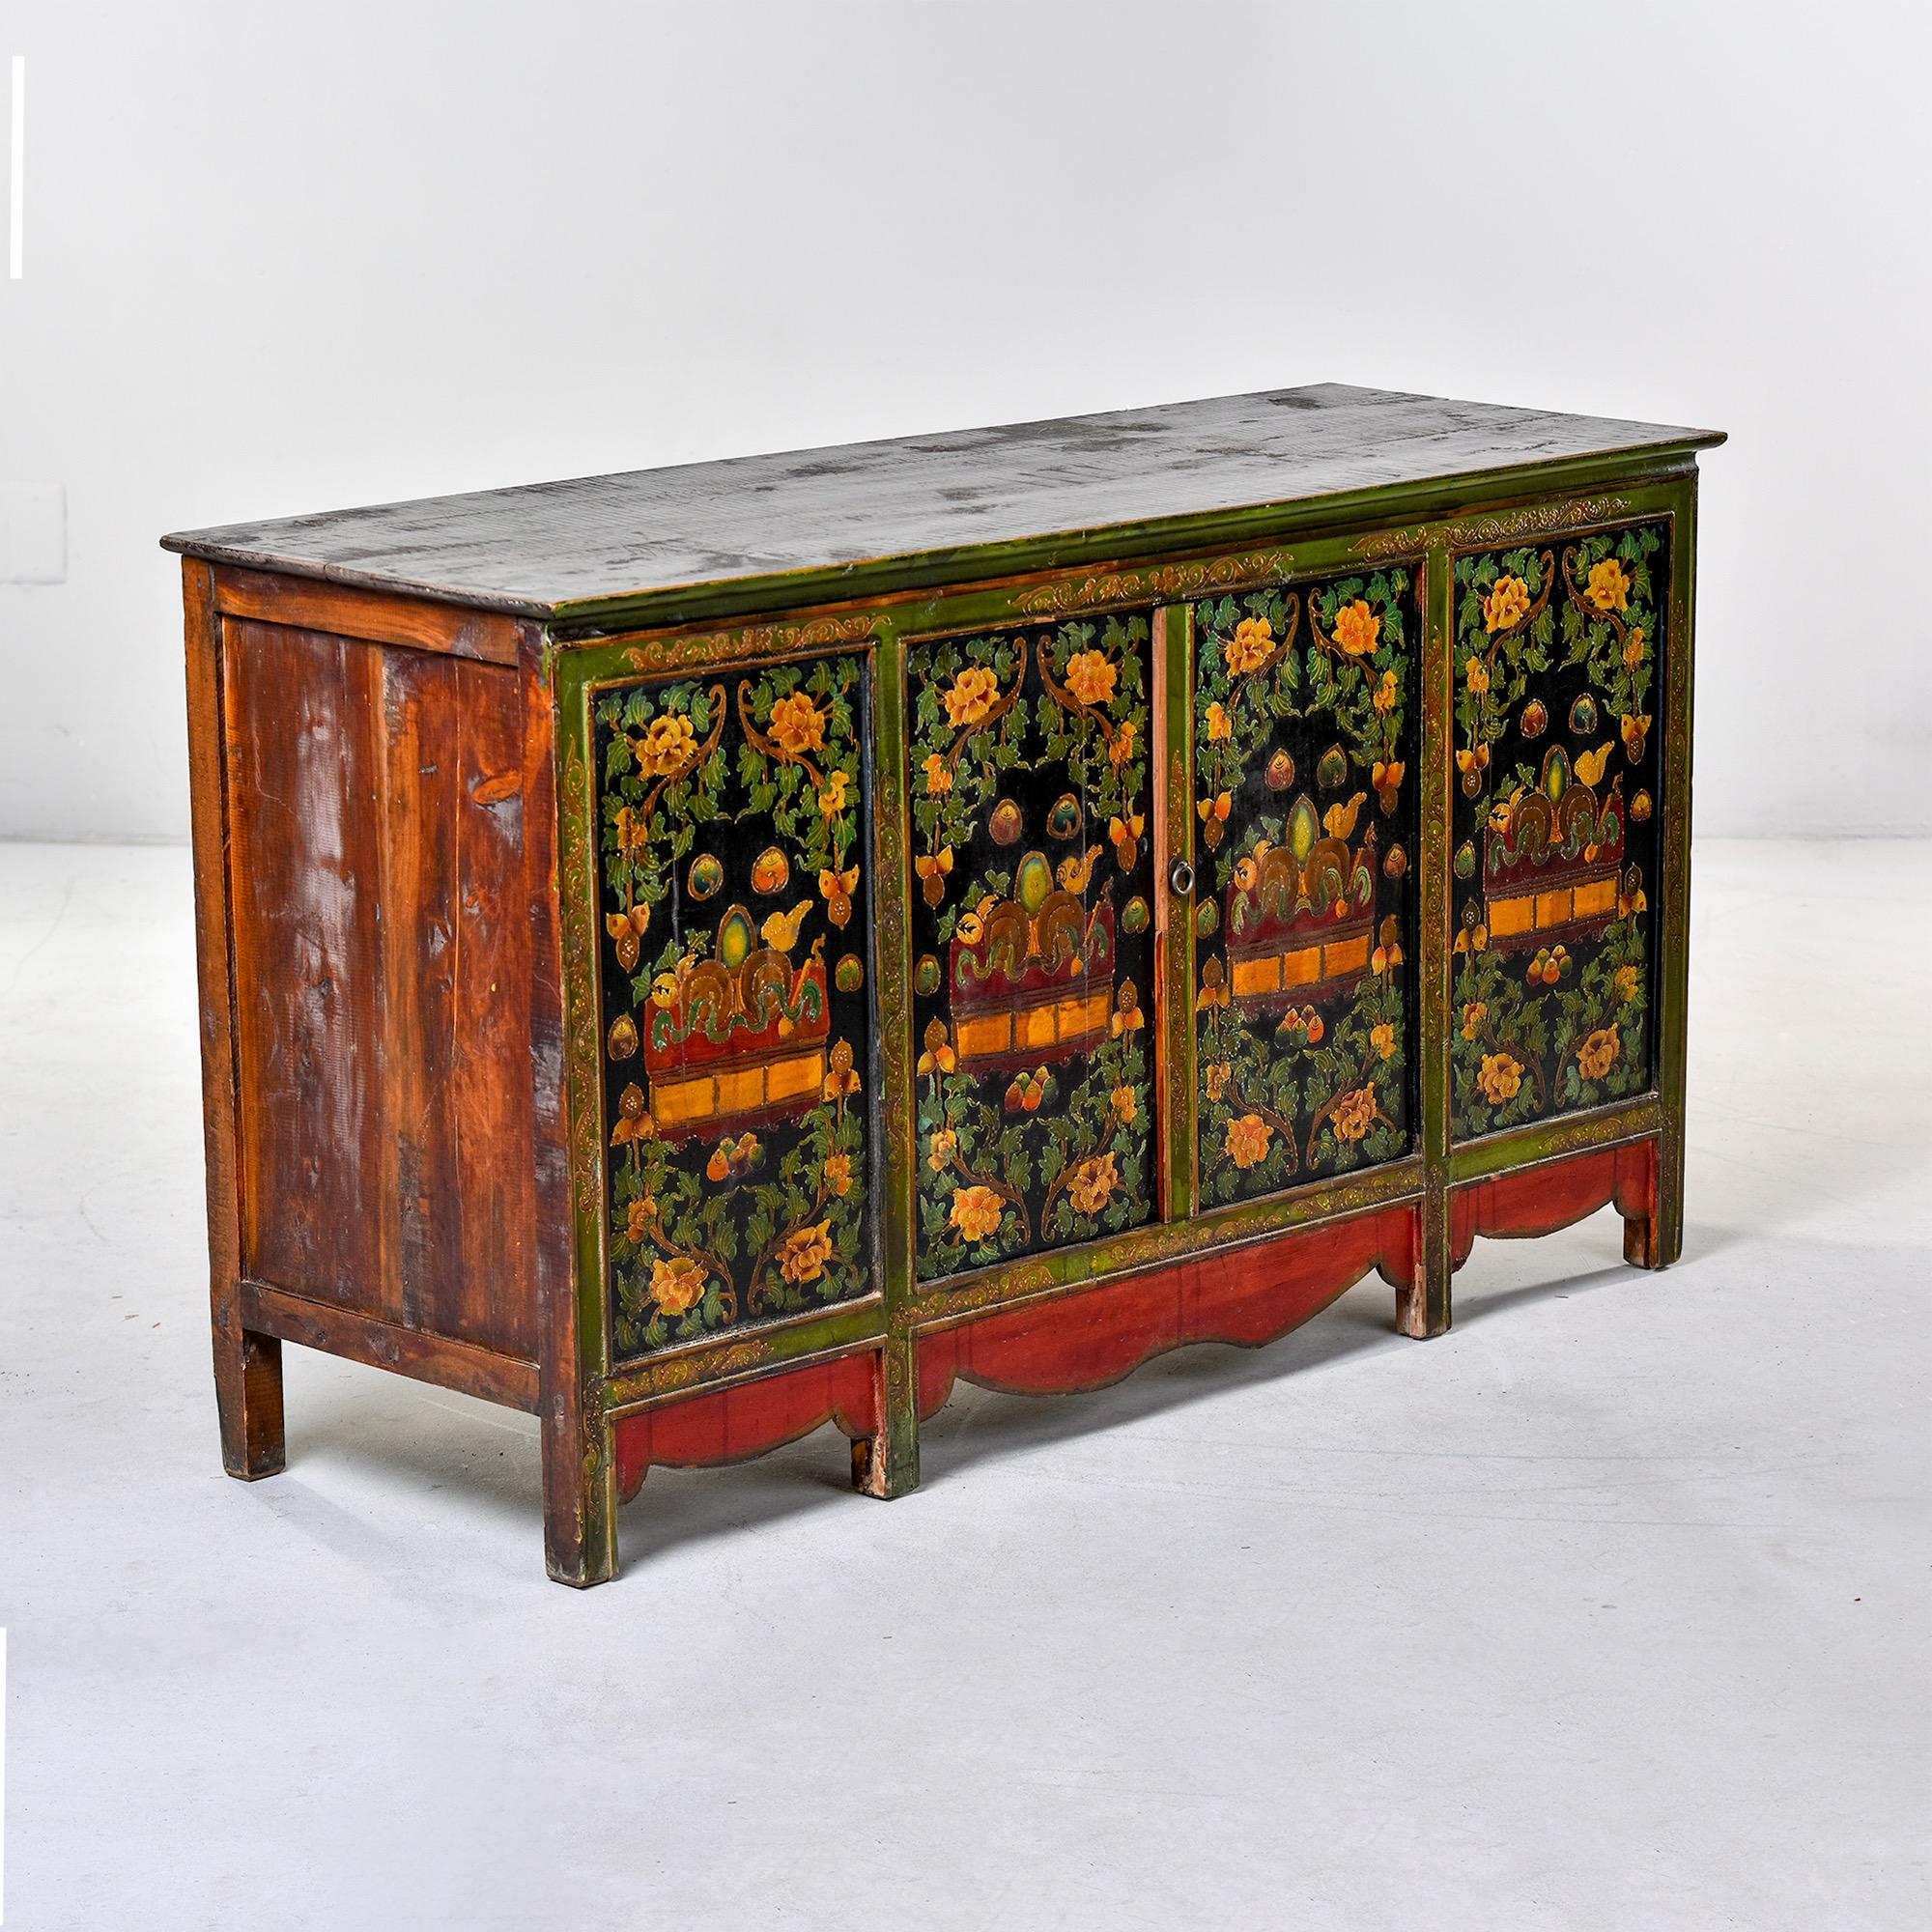 Circa 1910 Tibetan cabinet has four hand painted panels with a floral design in green, black, and gold with red accents. Scalloped red apron. Two center doors open to storage compartment. Mortis and tenon construction. Unknown maker.